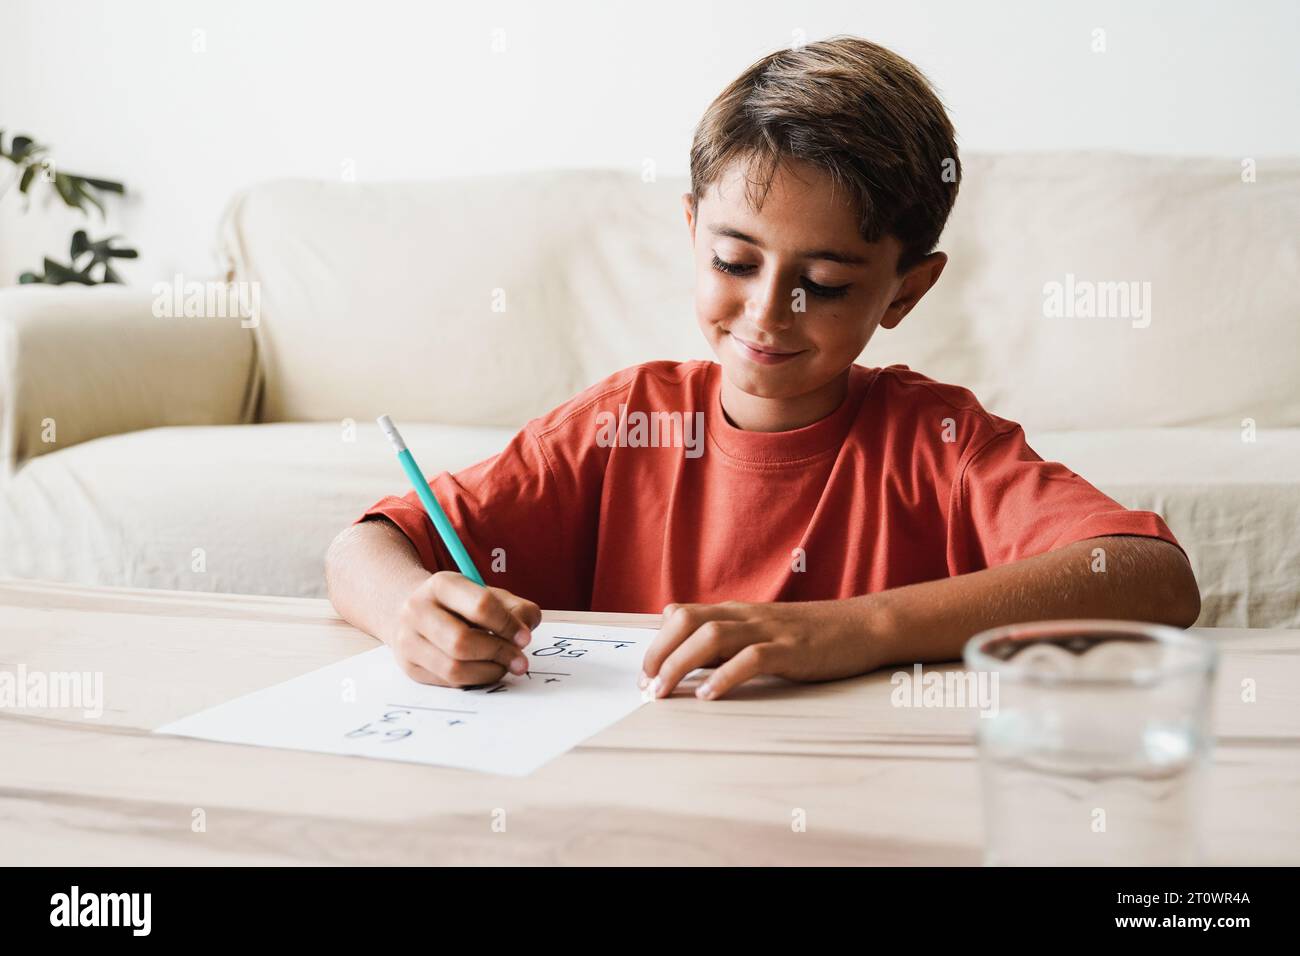 Home school education. Happy Latin child studying for math project. Focus on face Stock Photo